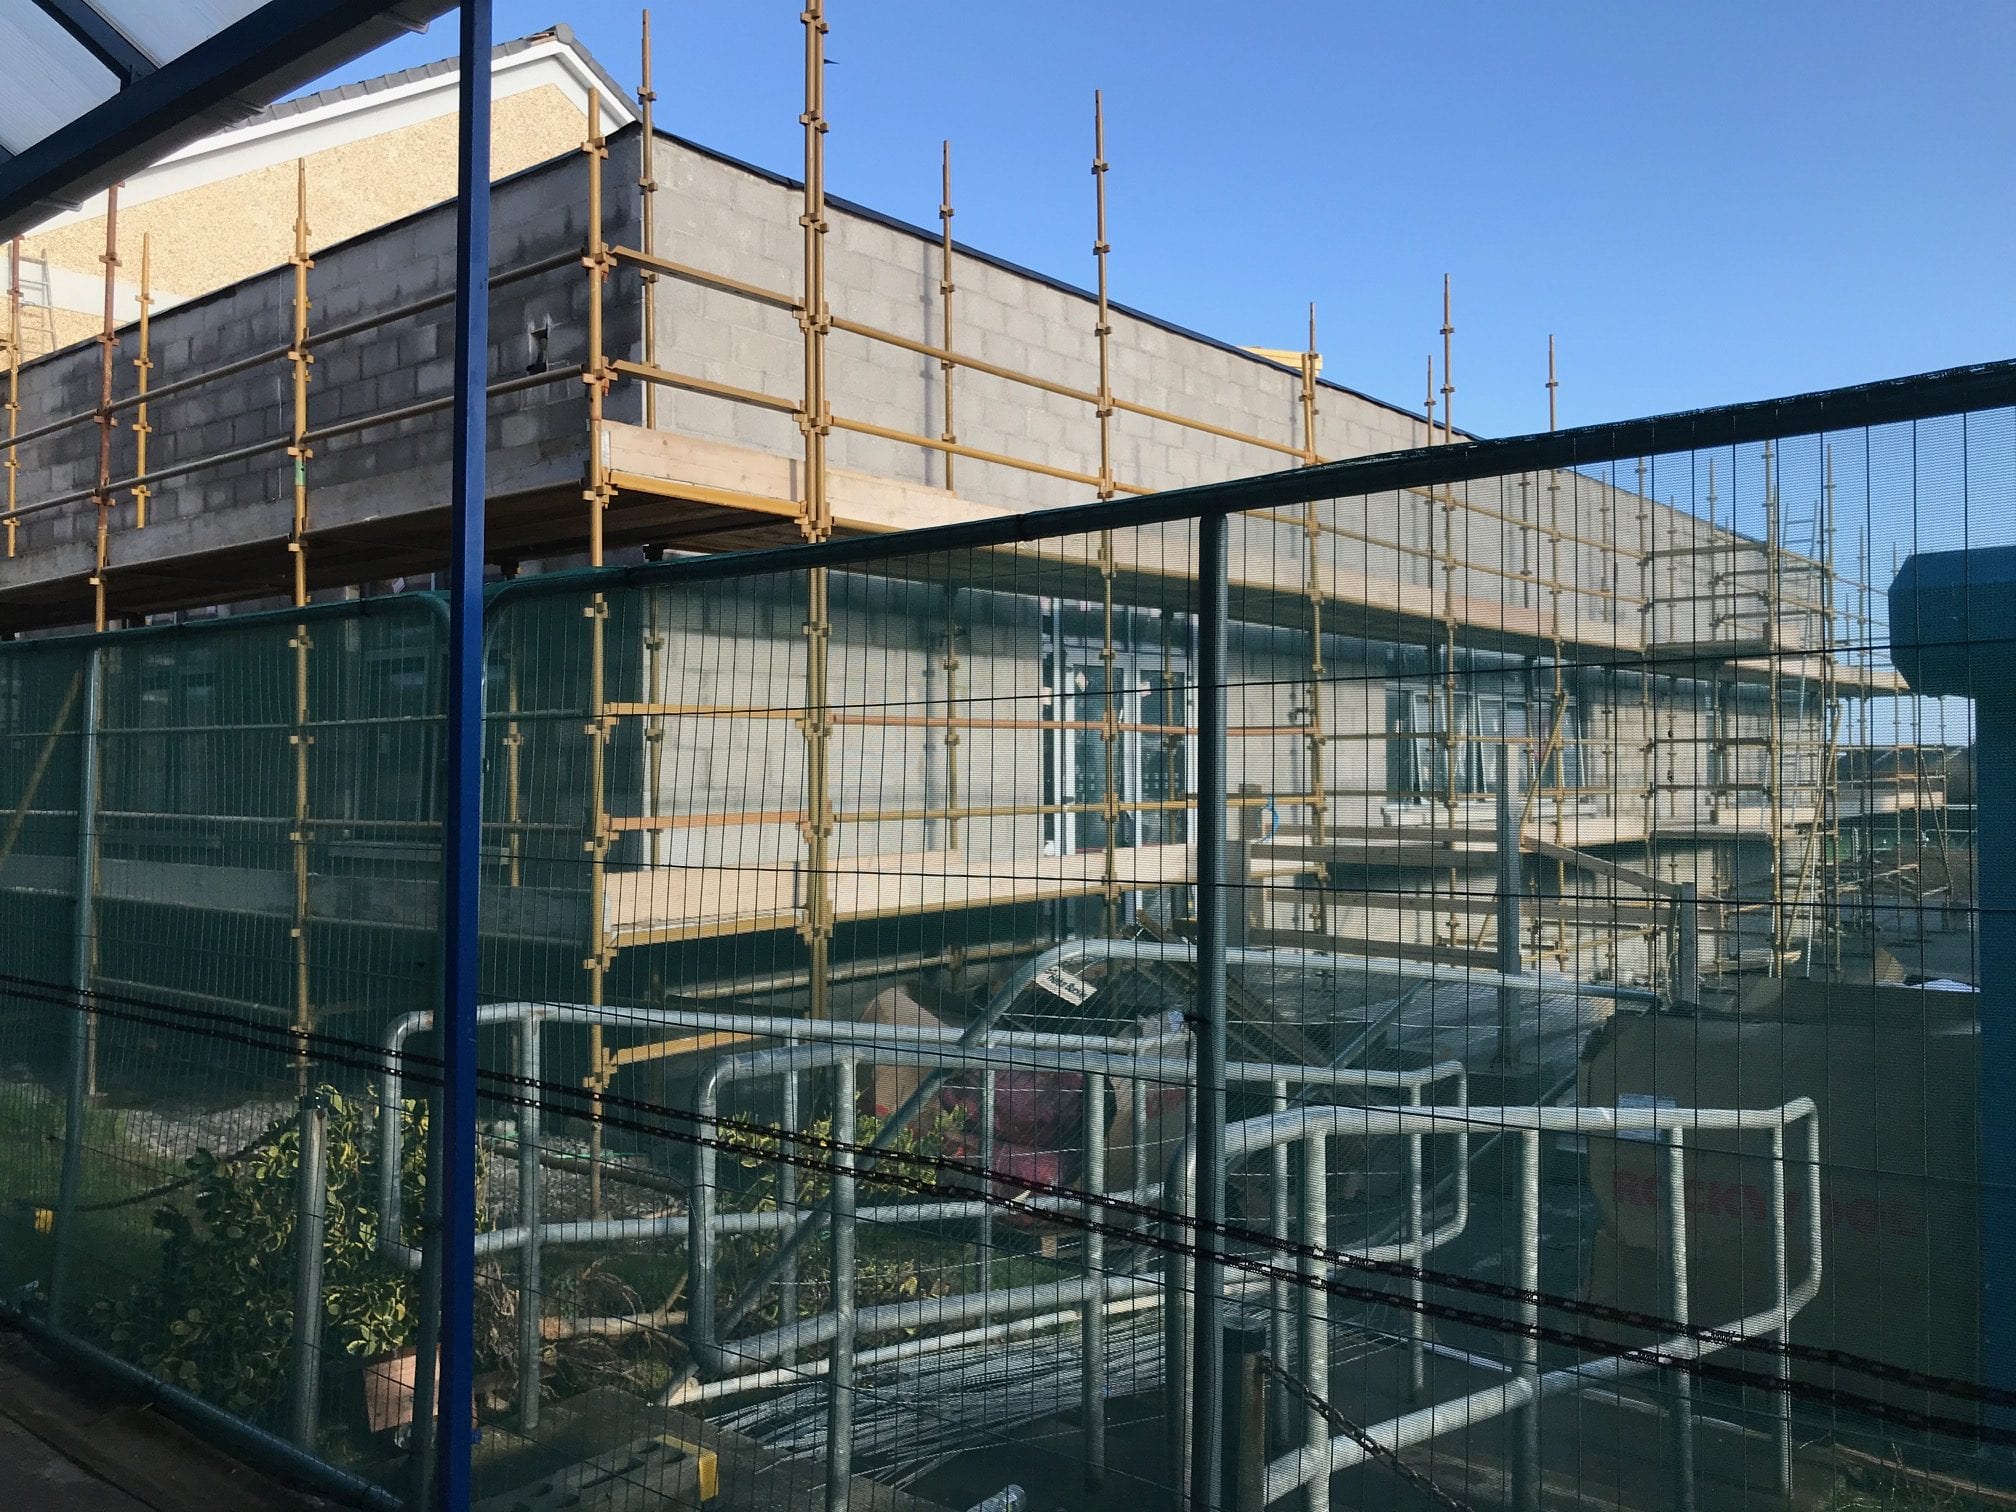 February 2018: New Woodwork Room and Classrooms for Desmond College by Moloney Contractors